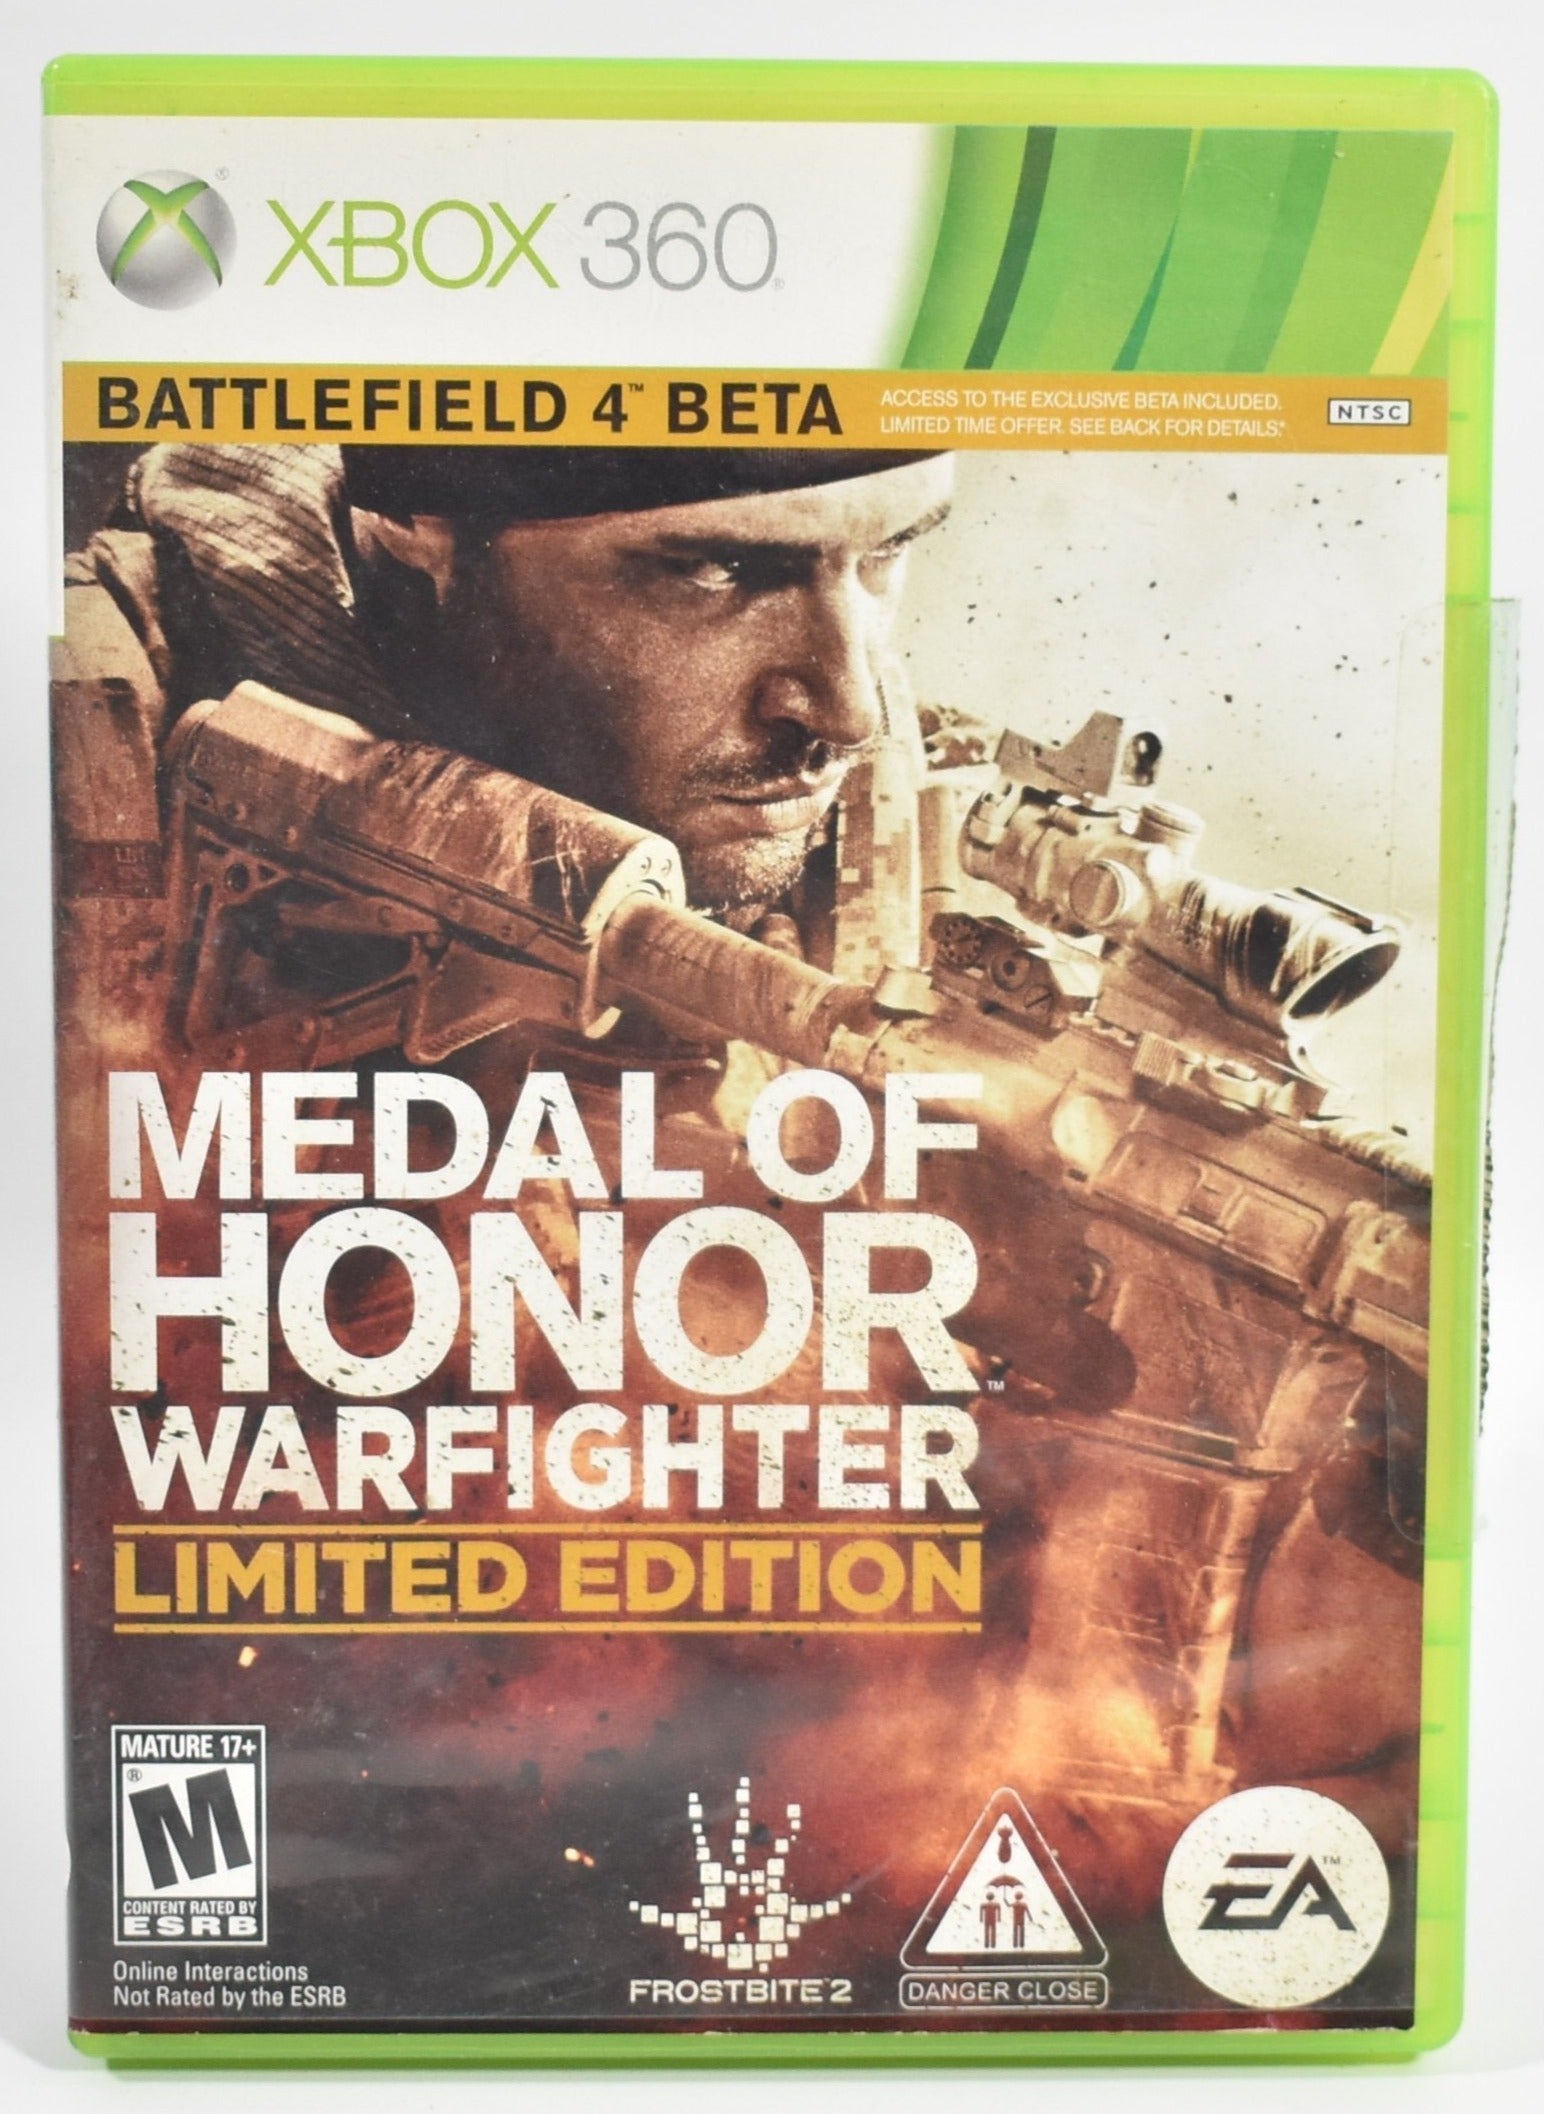 Xbox 360 Video Game Medal of Honor War Fighter Limited Edition USED